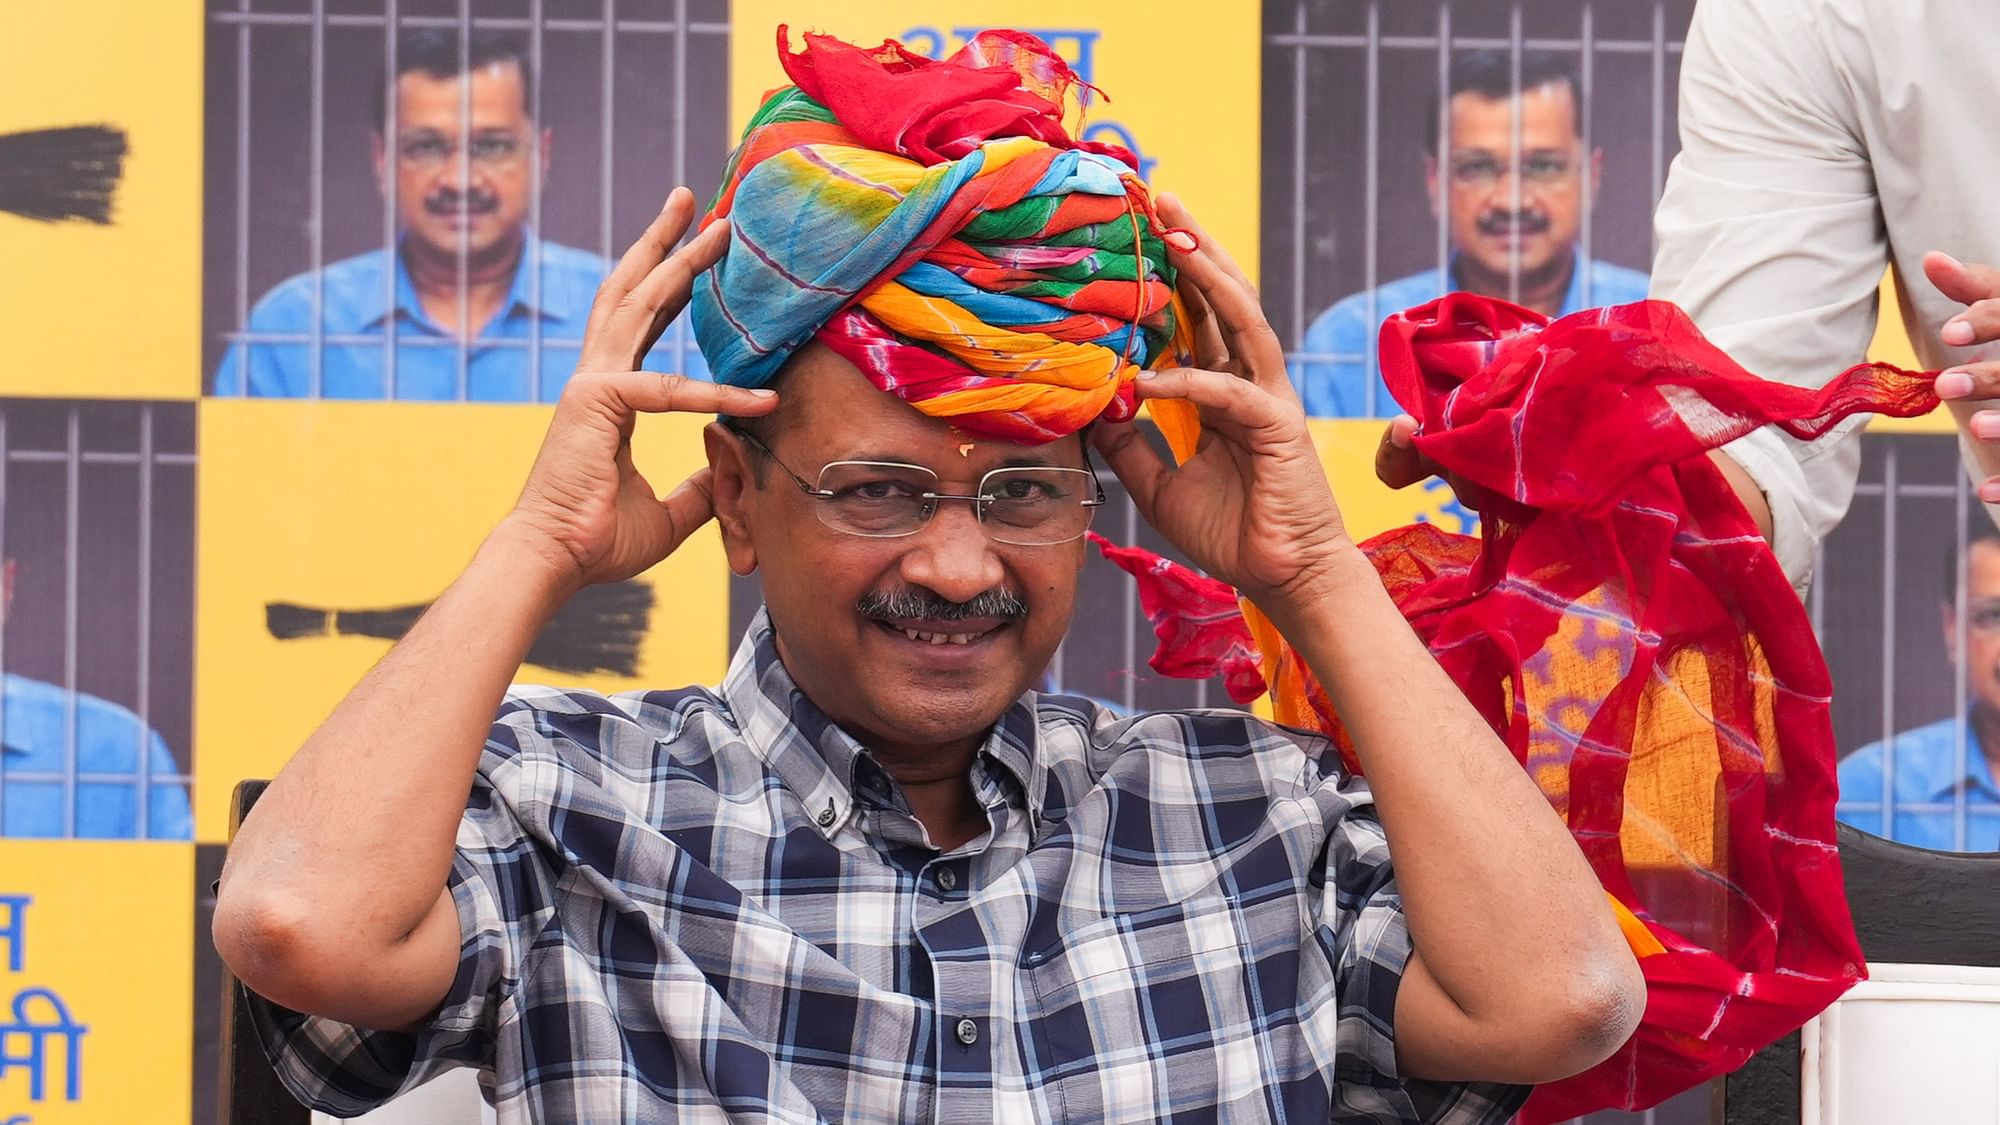 Cant Crush the Idea of AAP: Delhi CM Arvind Kejriwal Hits the Campaign Trail [Video]